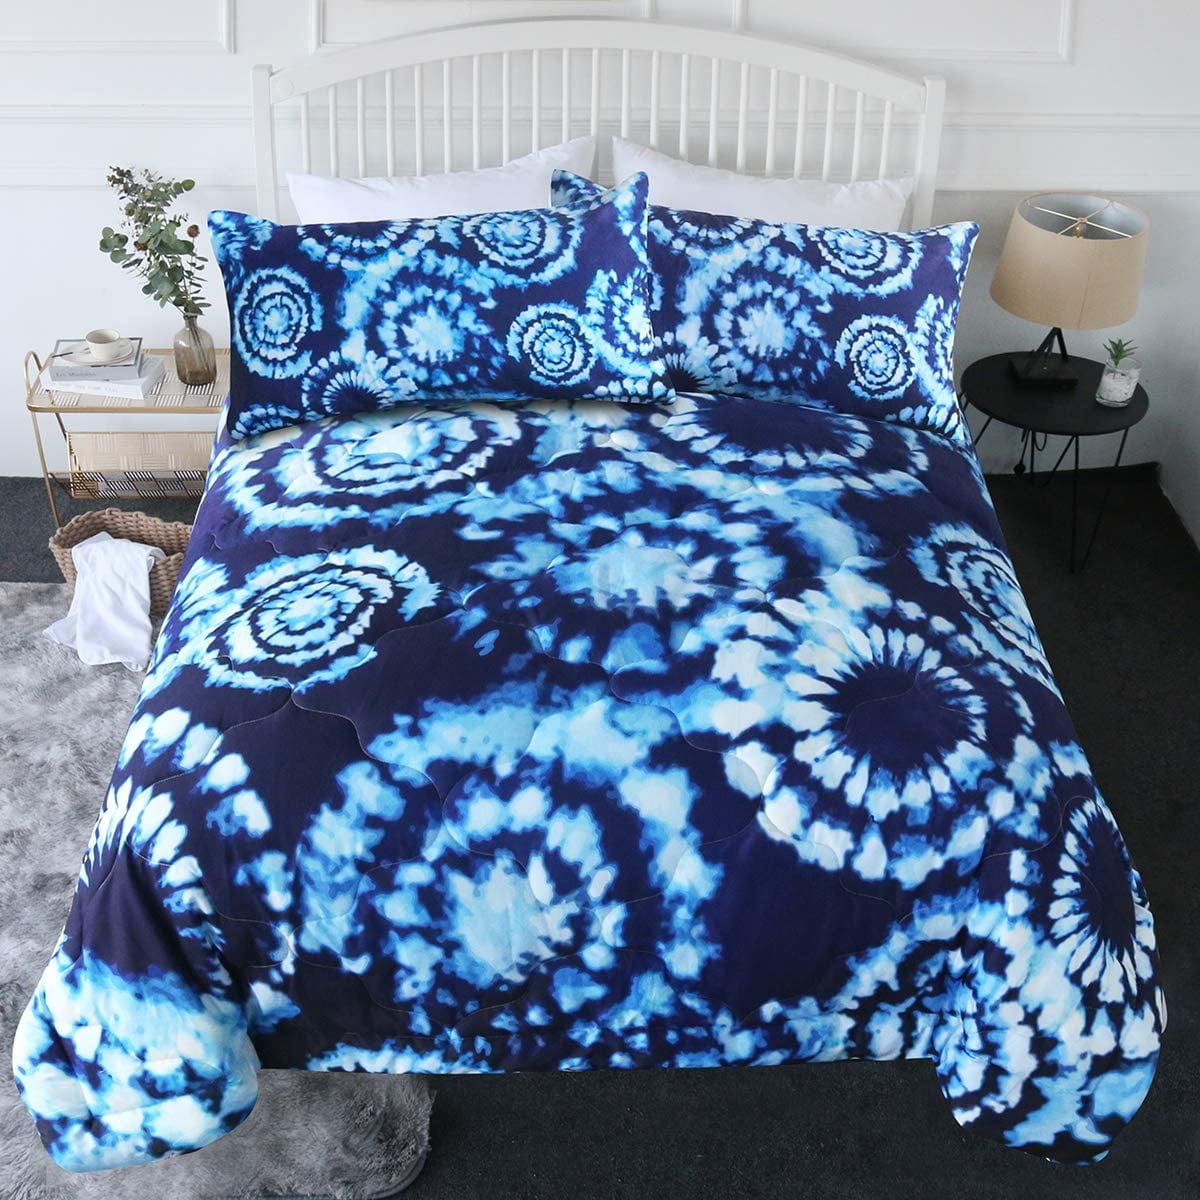 Details about   100% Cotton New Blue Tie dyed Boho printed 3 pcs Cal King Queen Comforter set 